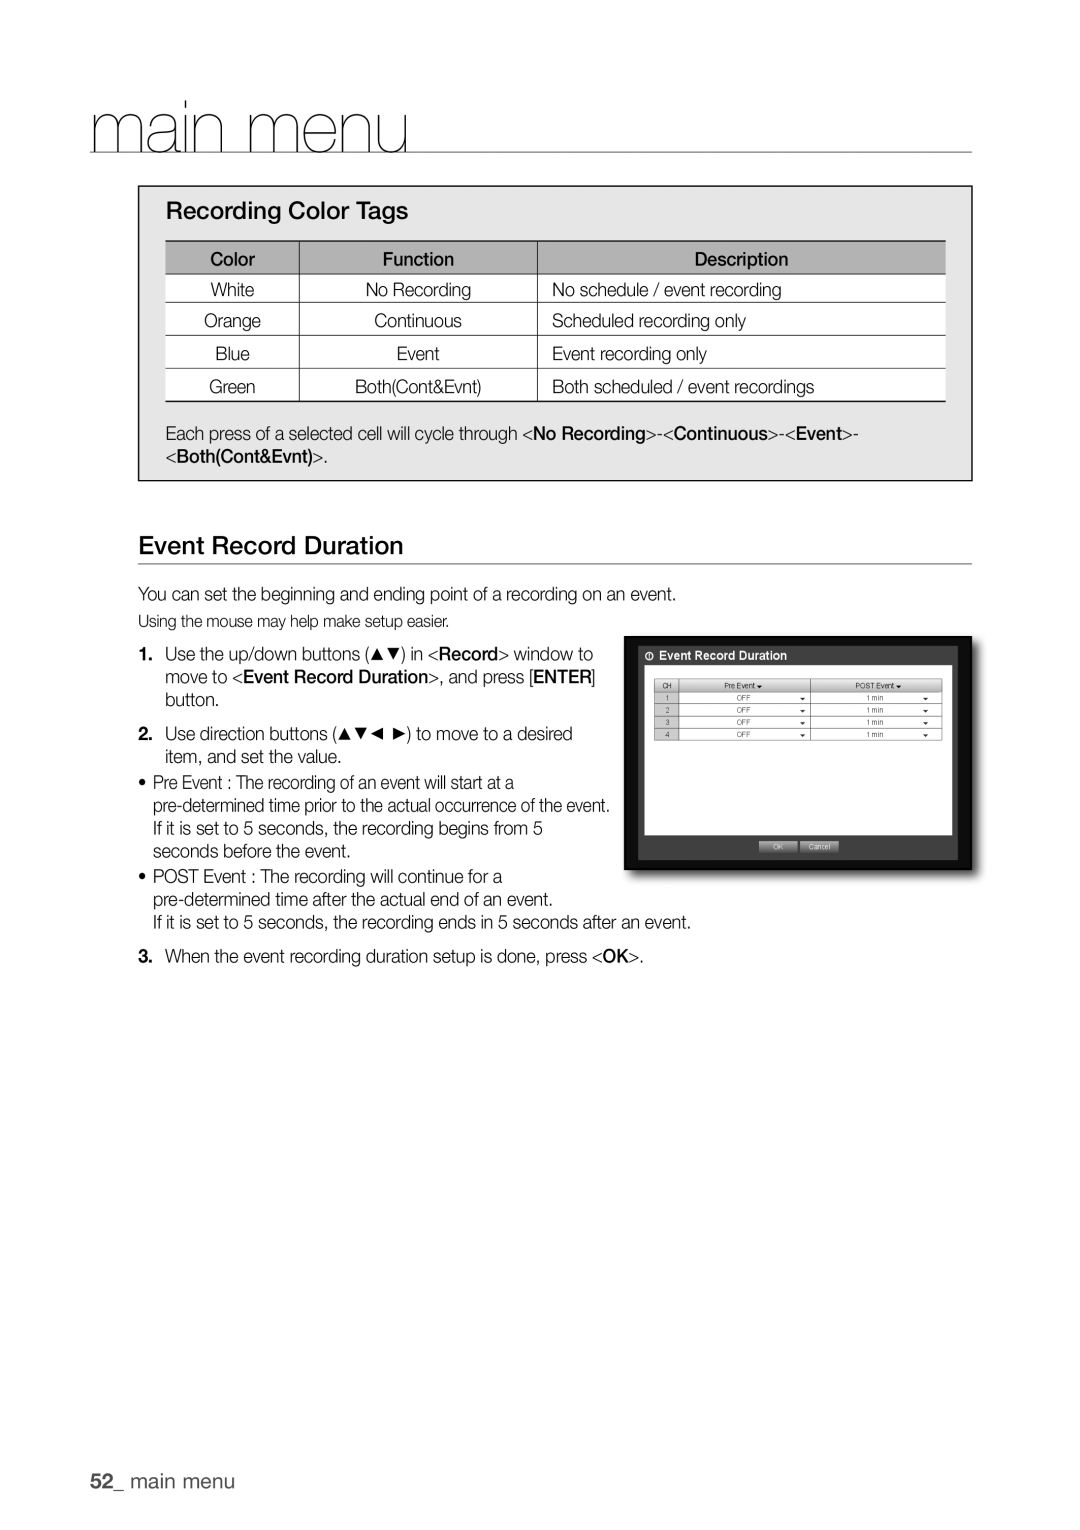 Samsung SDR3100 user manual event Record Duration, Recording Color Tags, 52_ main menu, in <Record> window to, button 